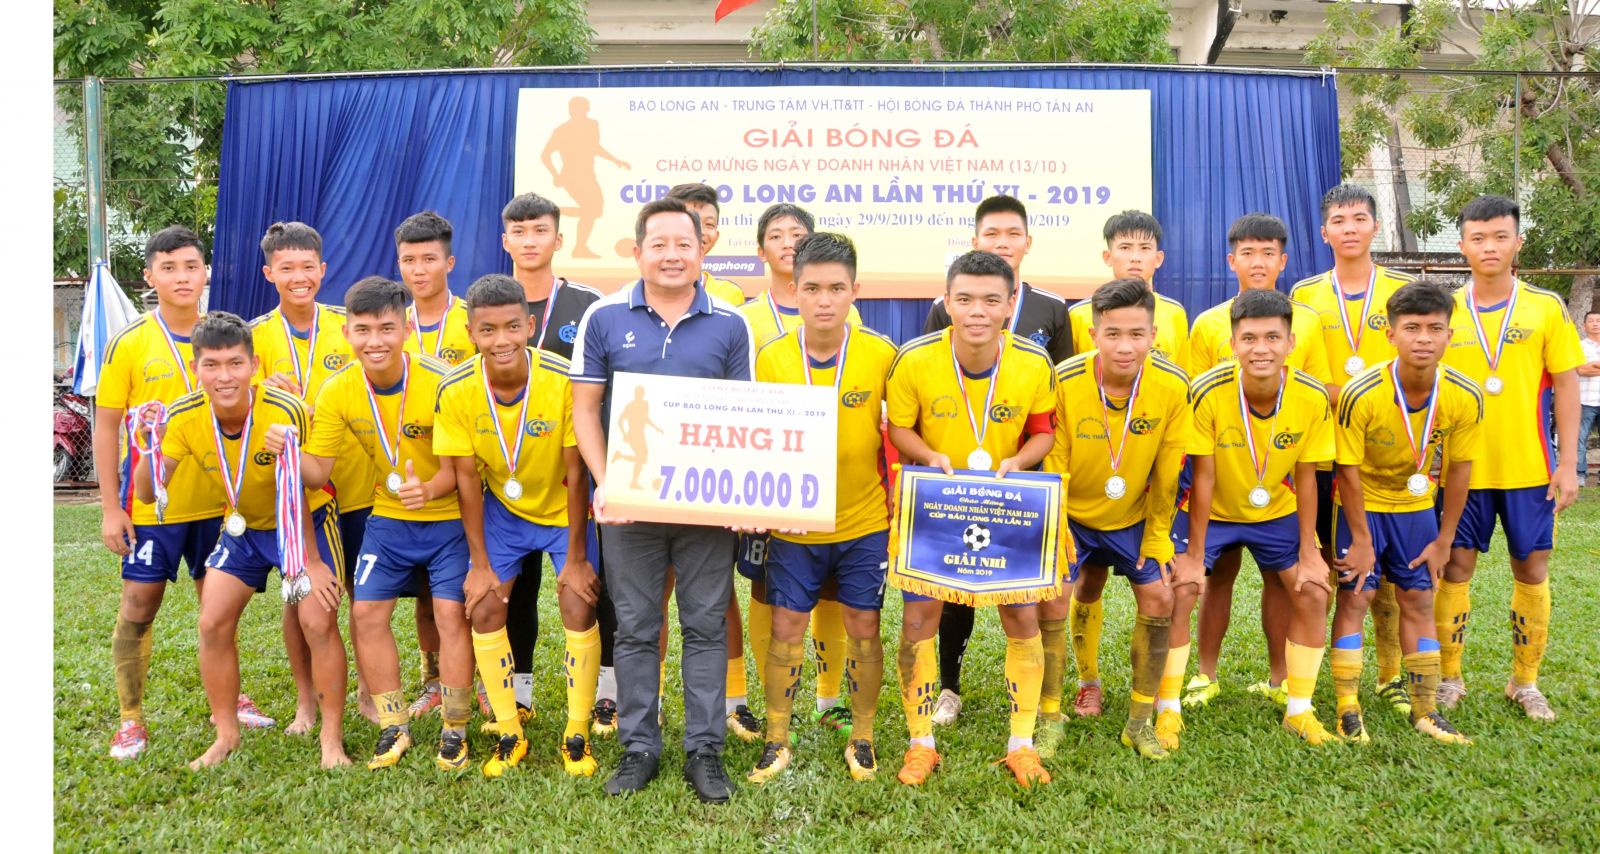 Dong Thap Youth team wins second prize